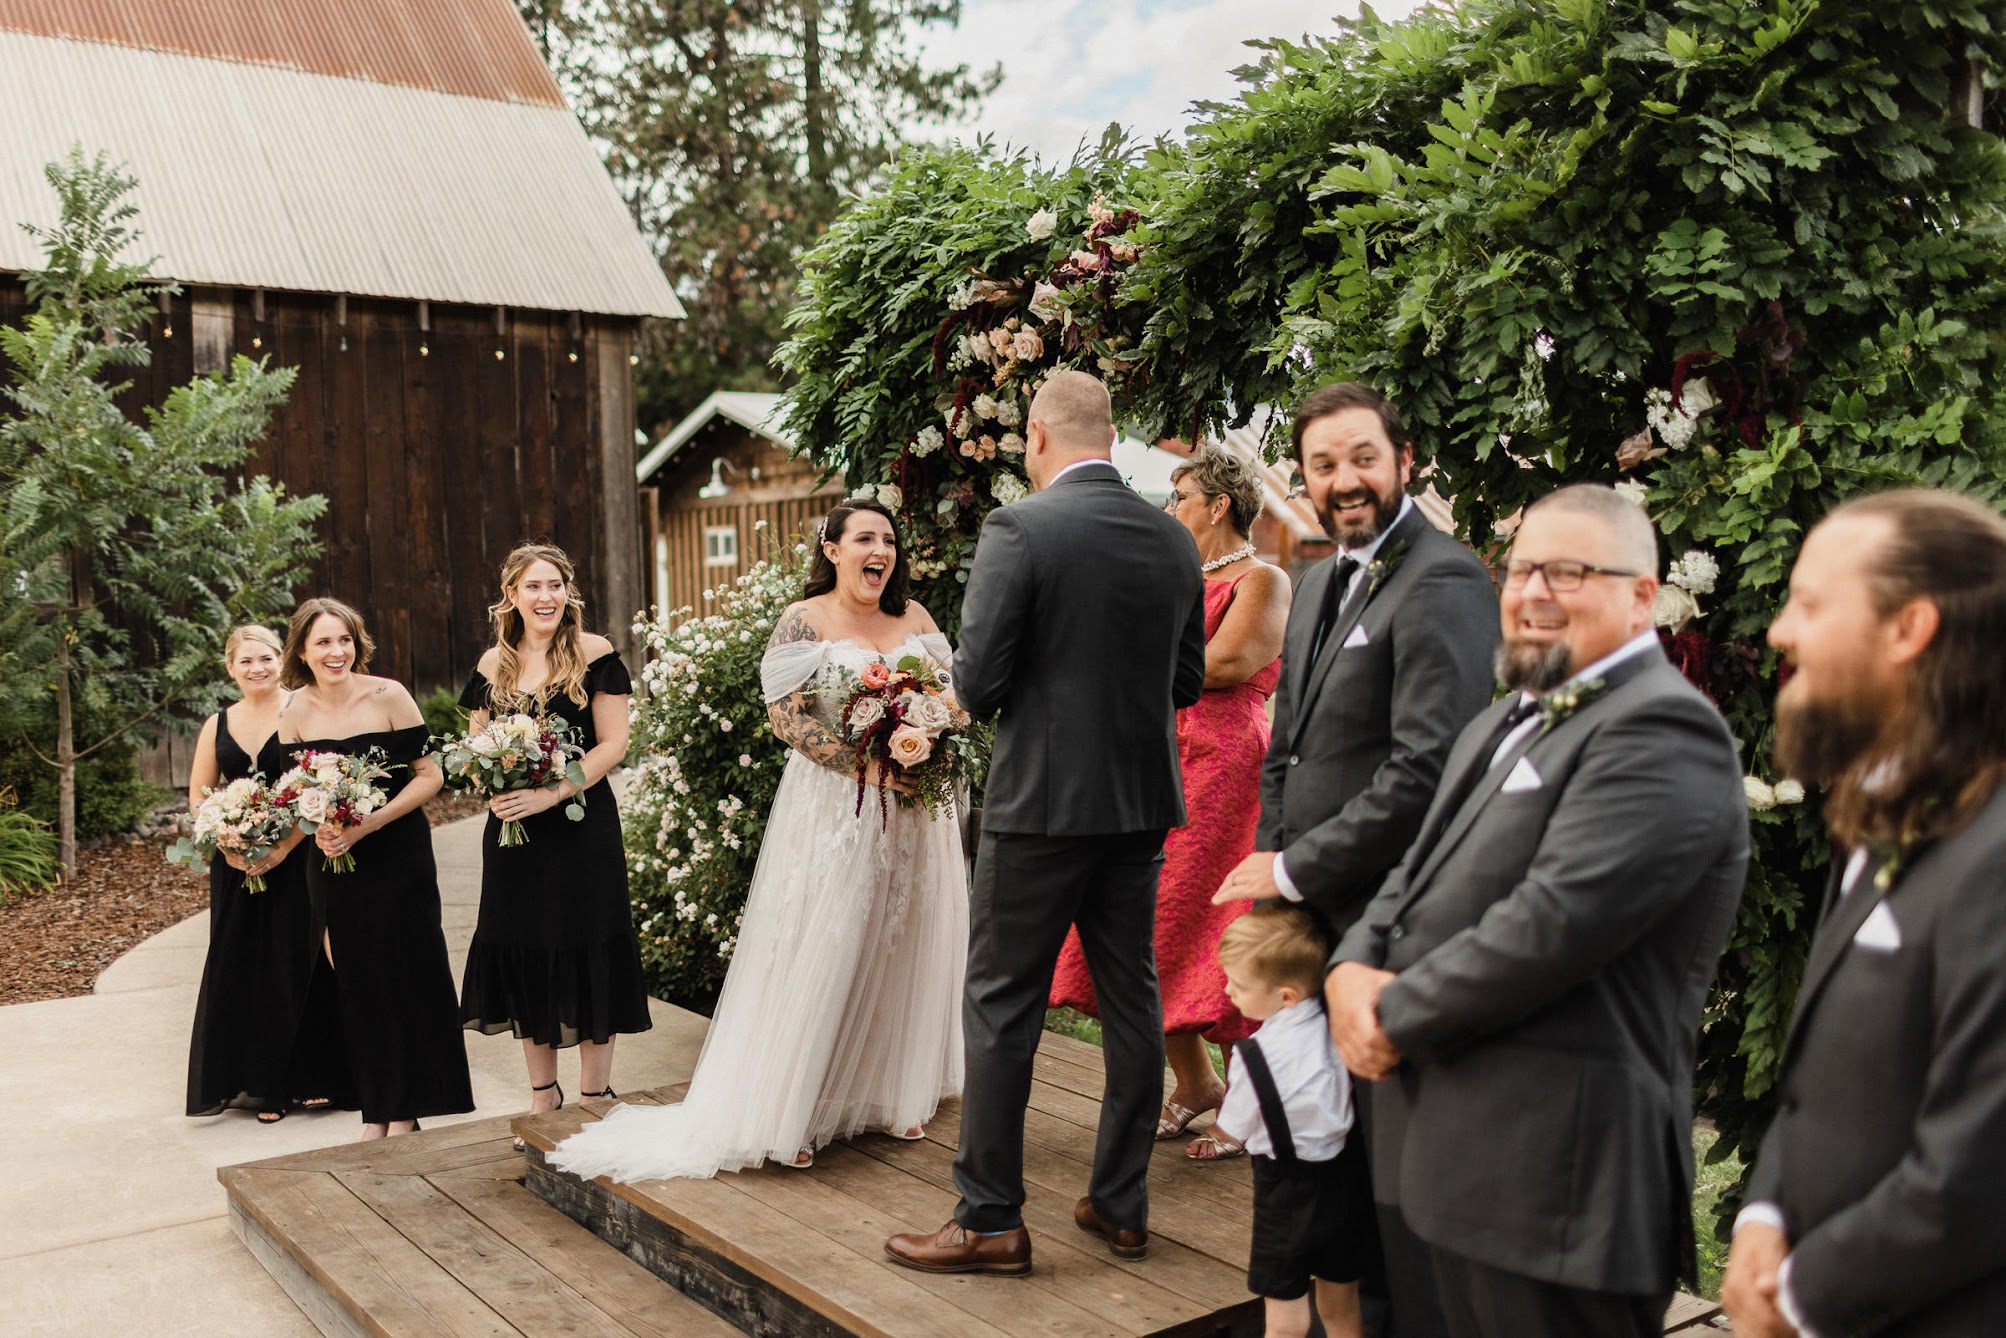 The whole bridal party, three bridesmaids and three groomsmen, bride and groom and the officiant laughing during the ceremony.  